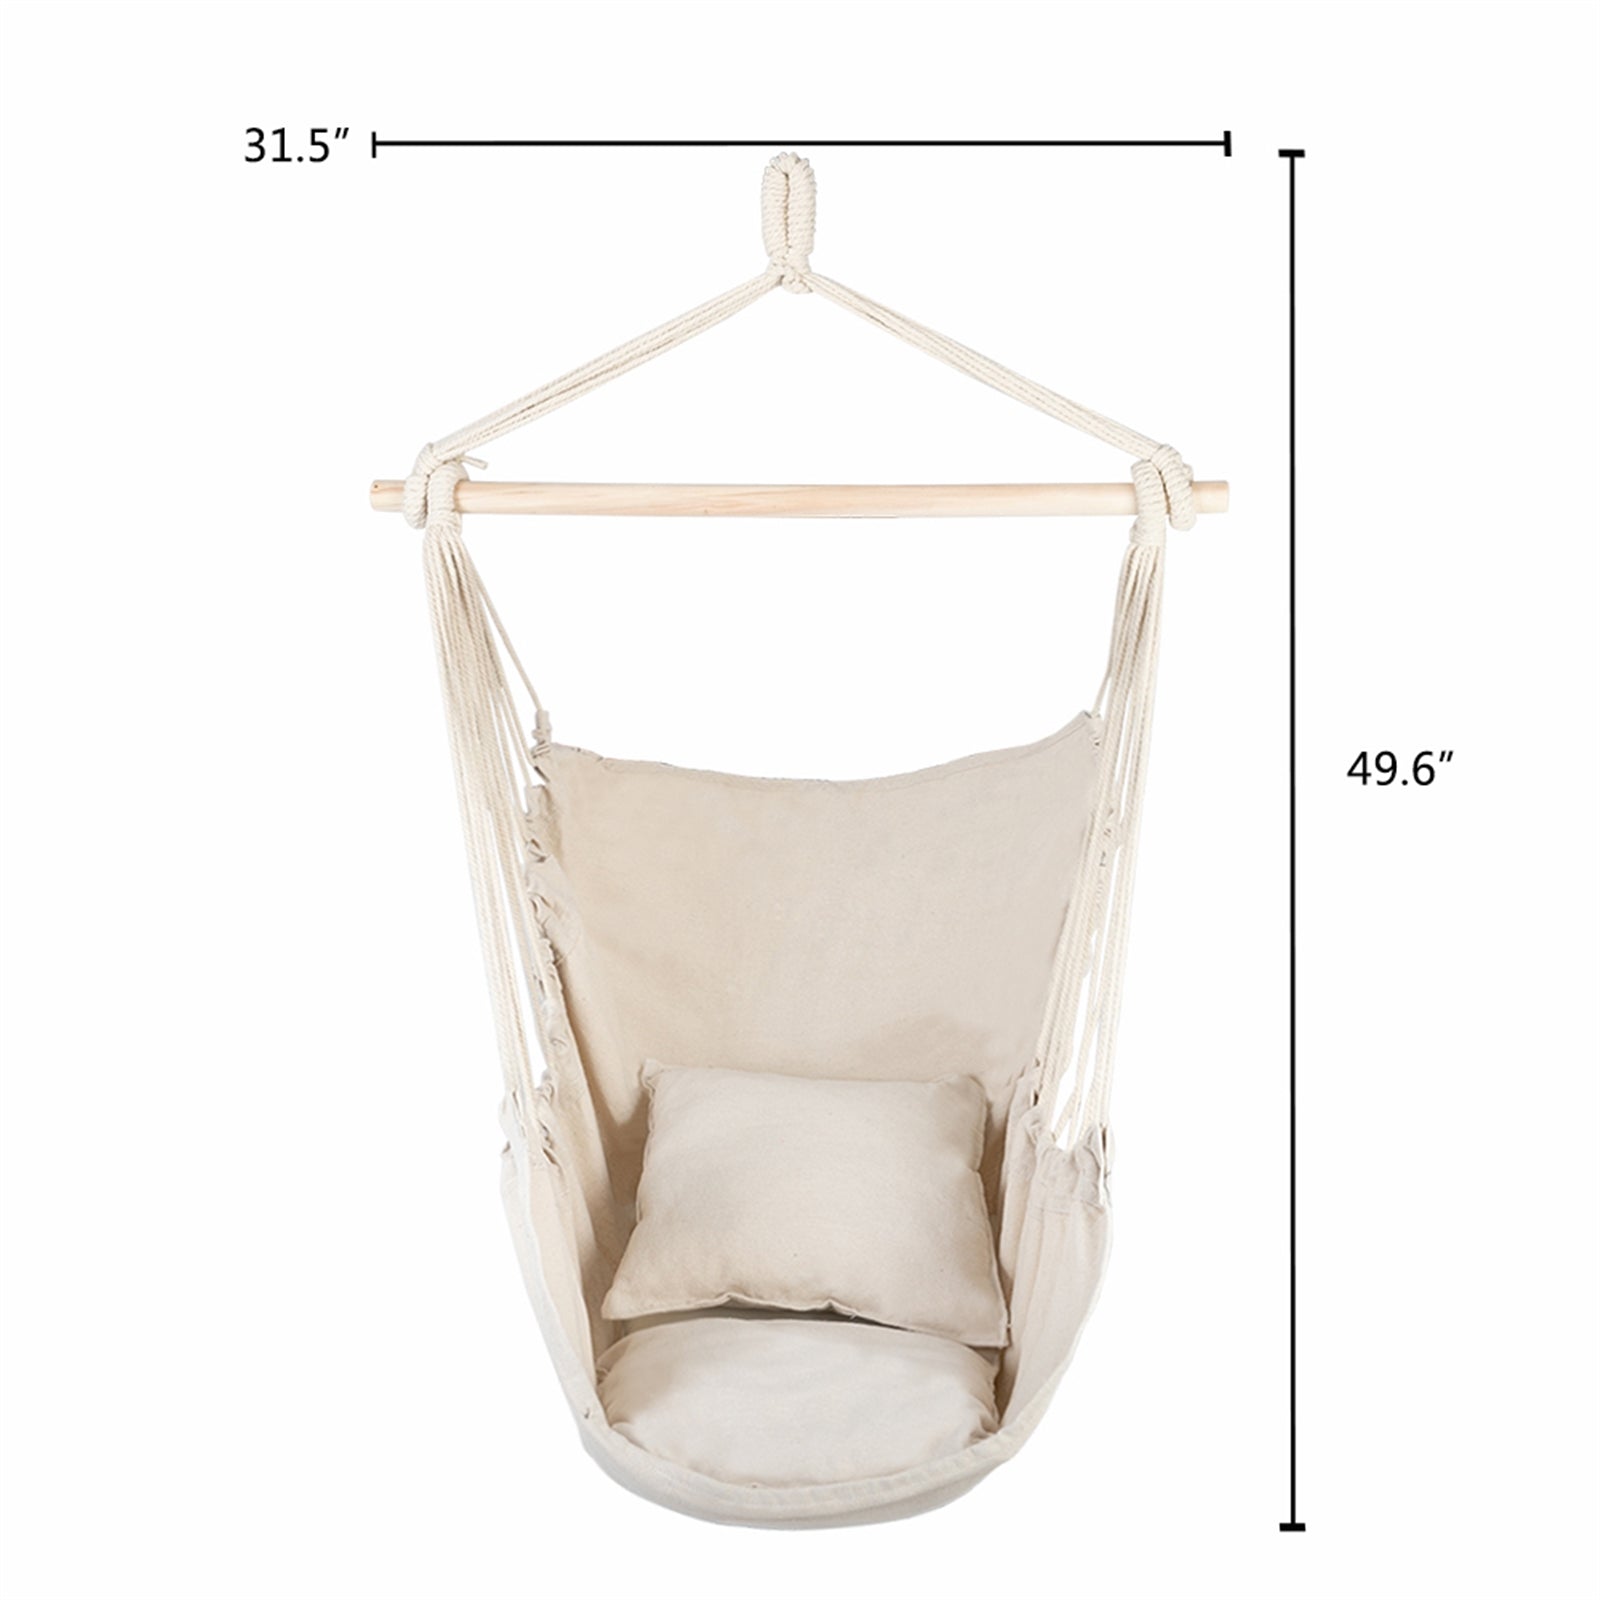 Hanging Rope Chair with Pillows - Beige - HomeRelaxOfficial